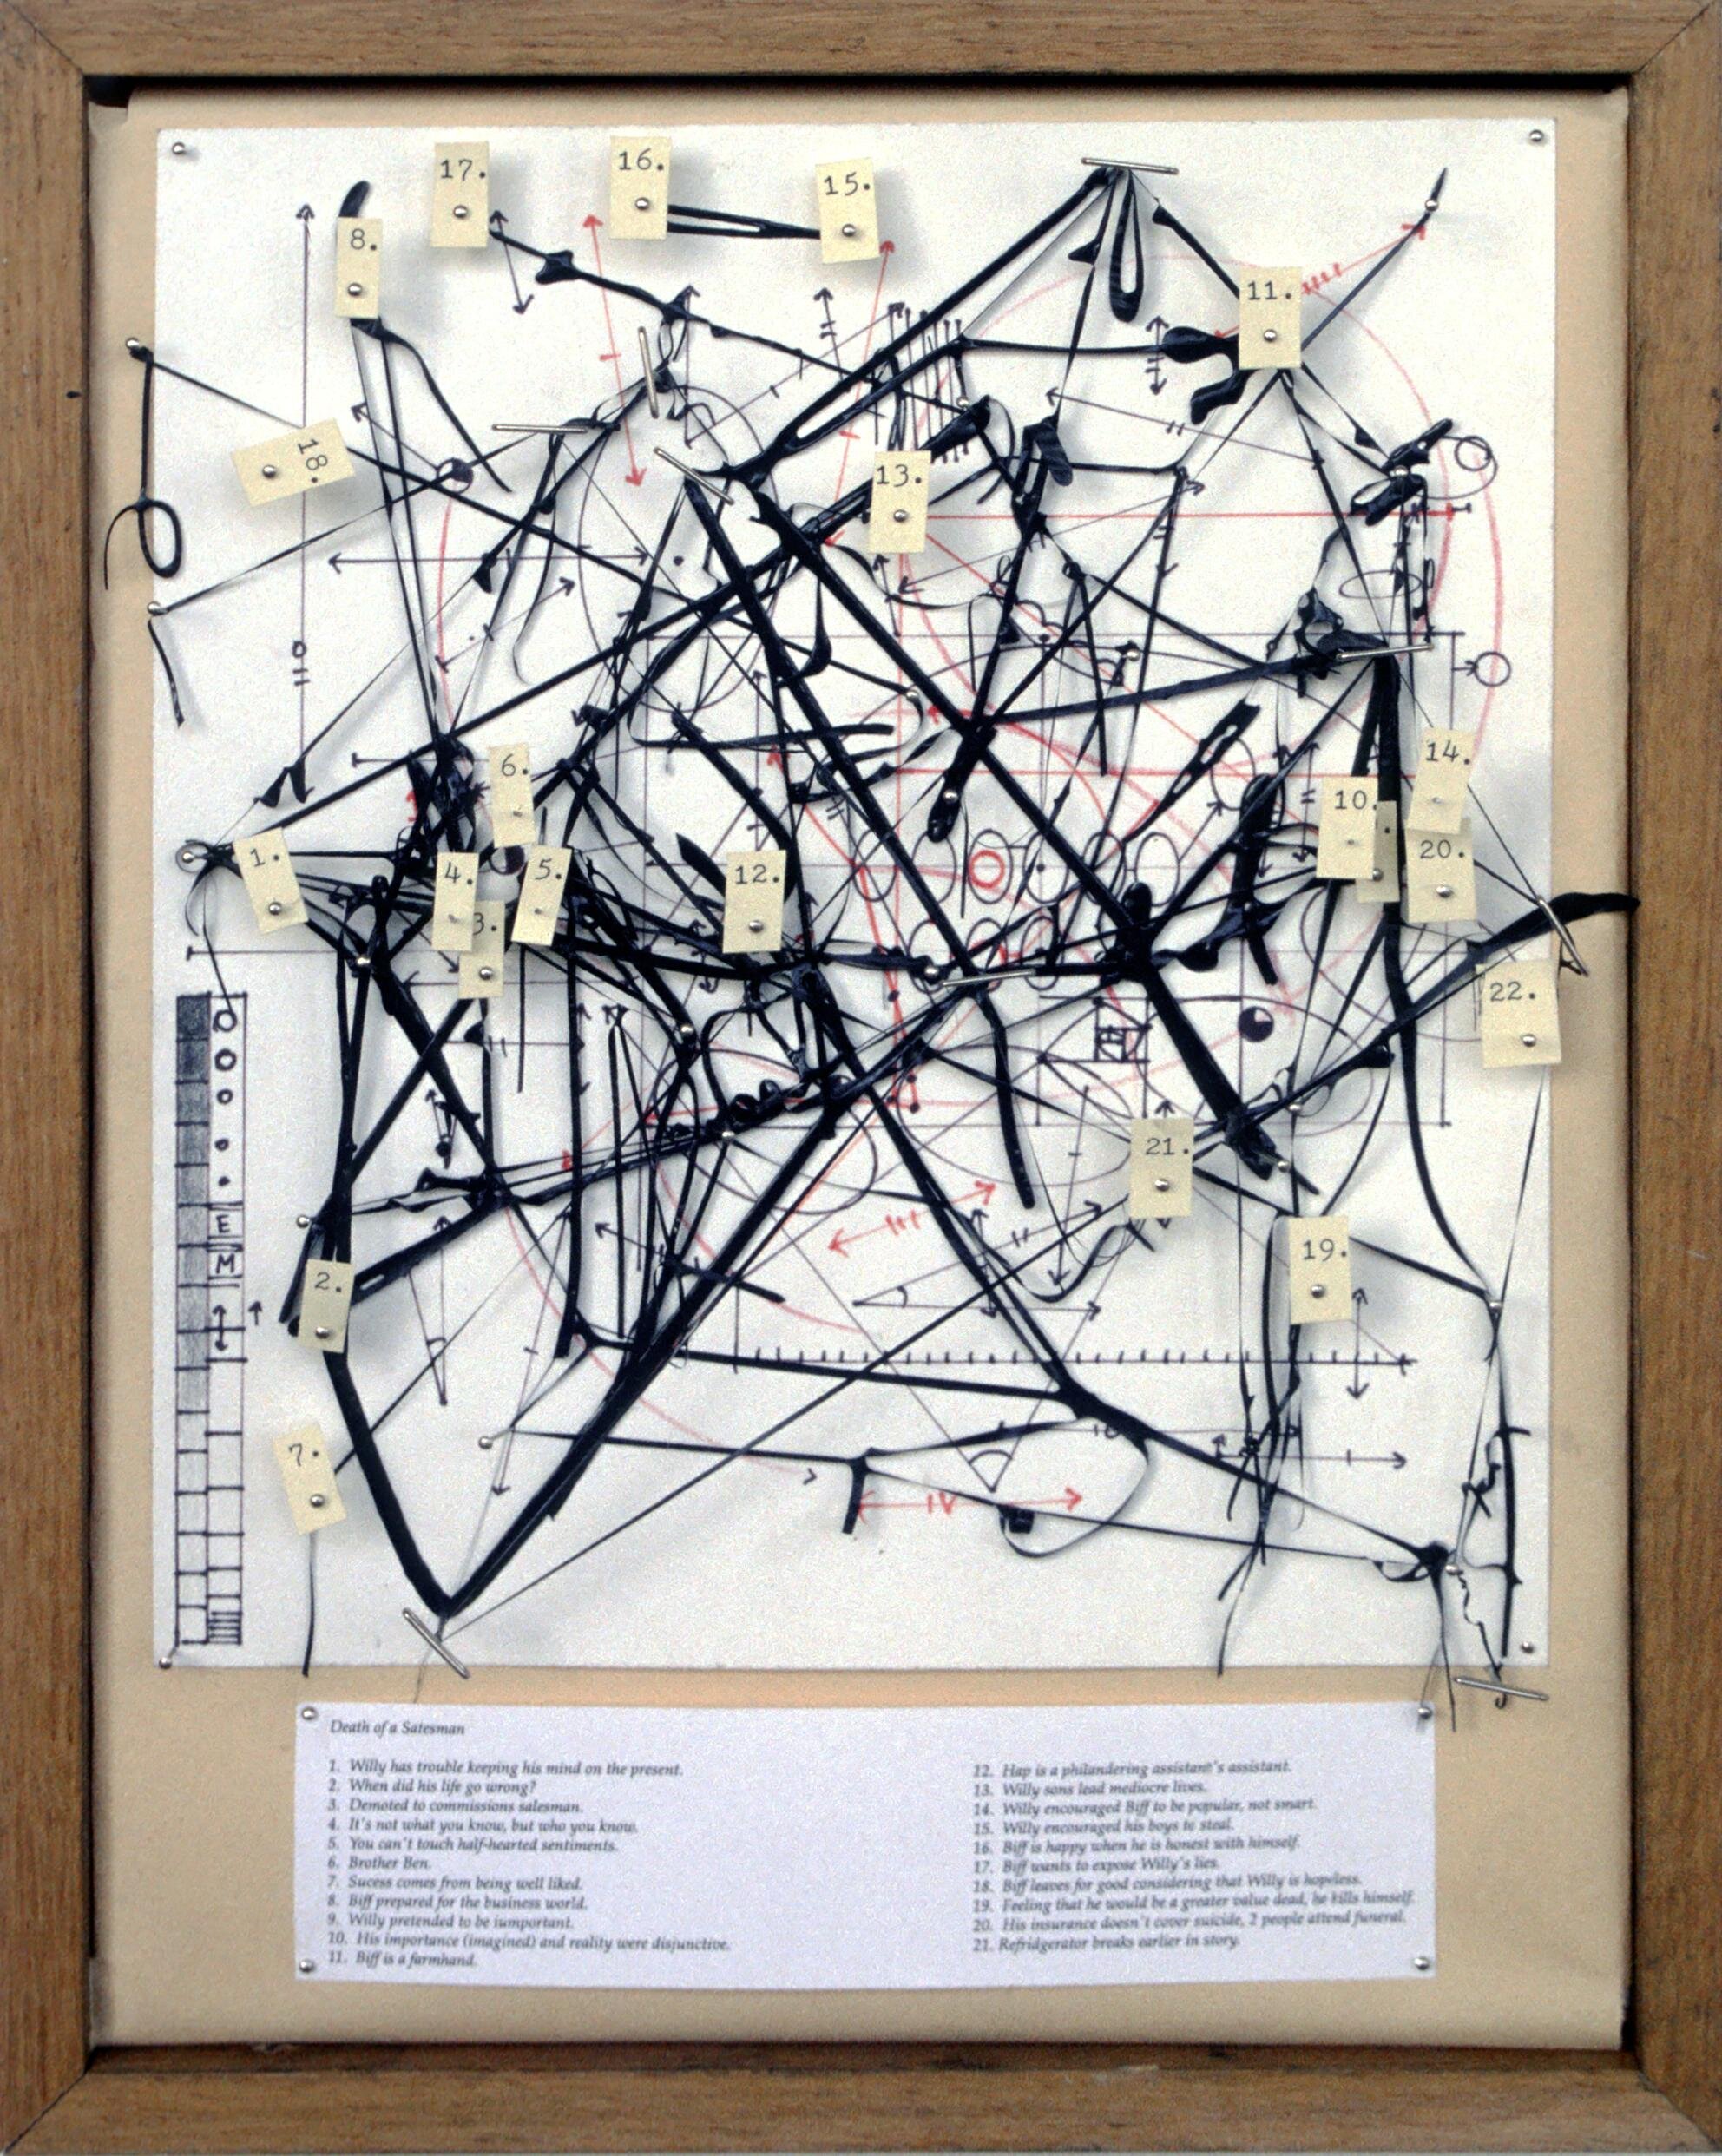 <b>Jason Gouliard</b></br><i>Initial study for "Death of a Salesman" Abstract</i></br>2002</br>mixed media assemblage